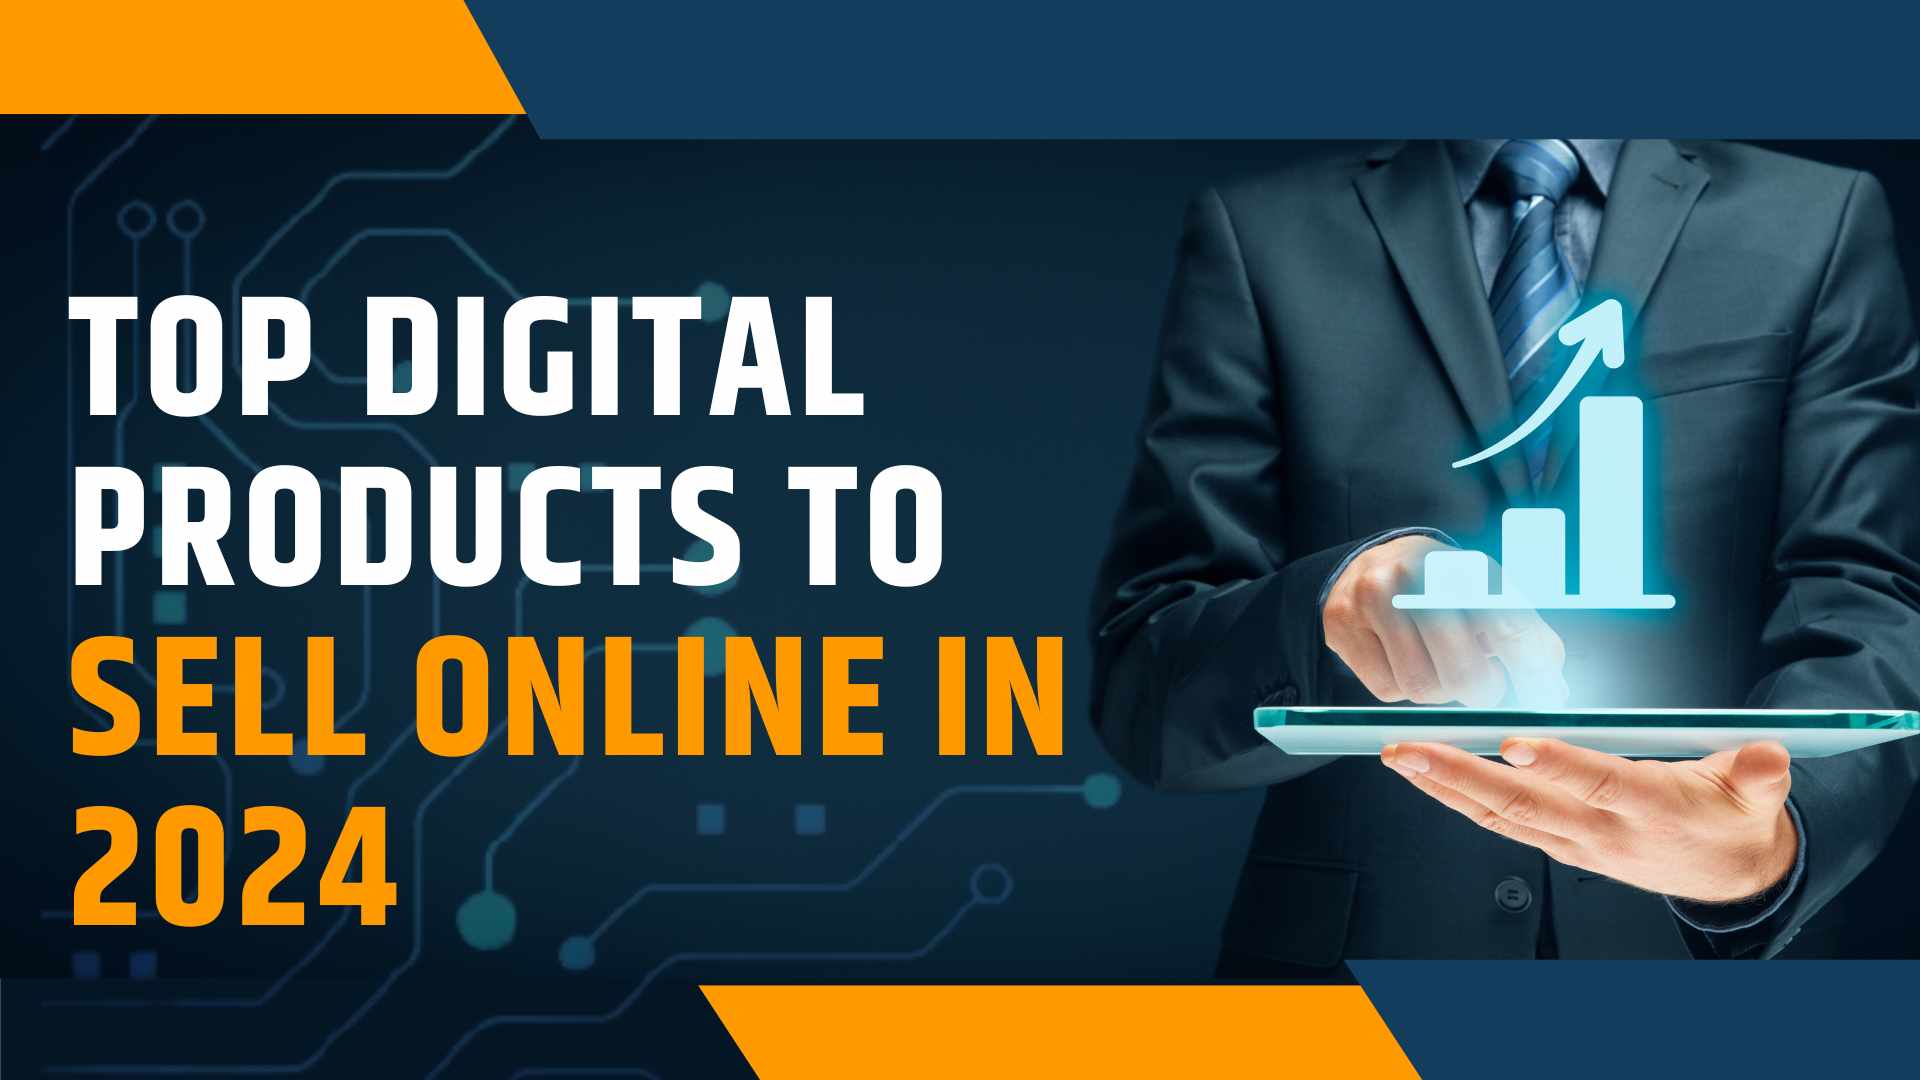 Top Digital Products to Sell Online in 2024